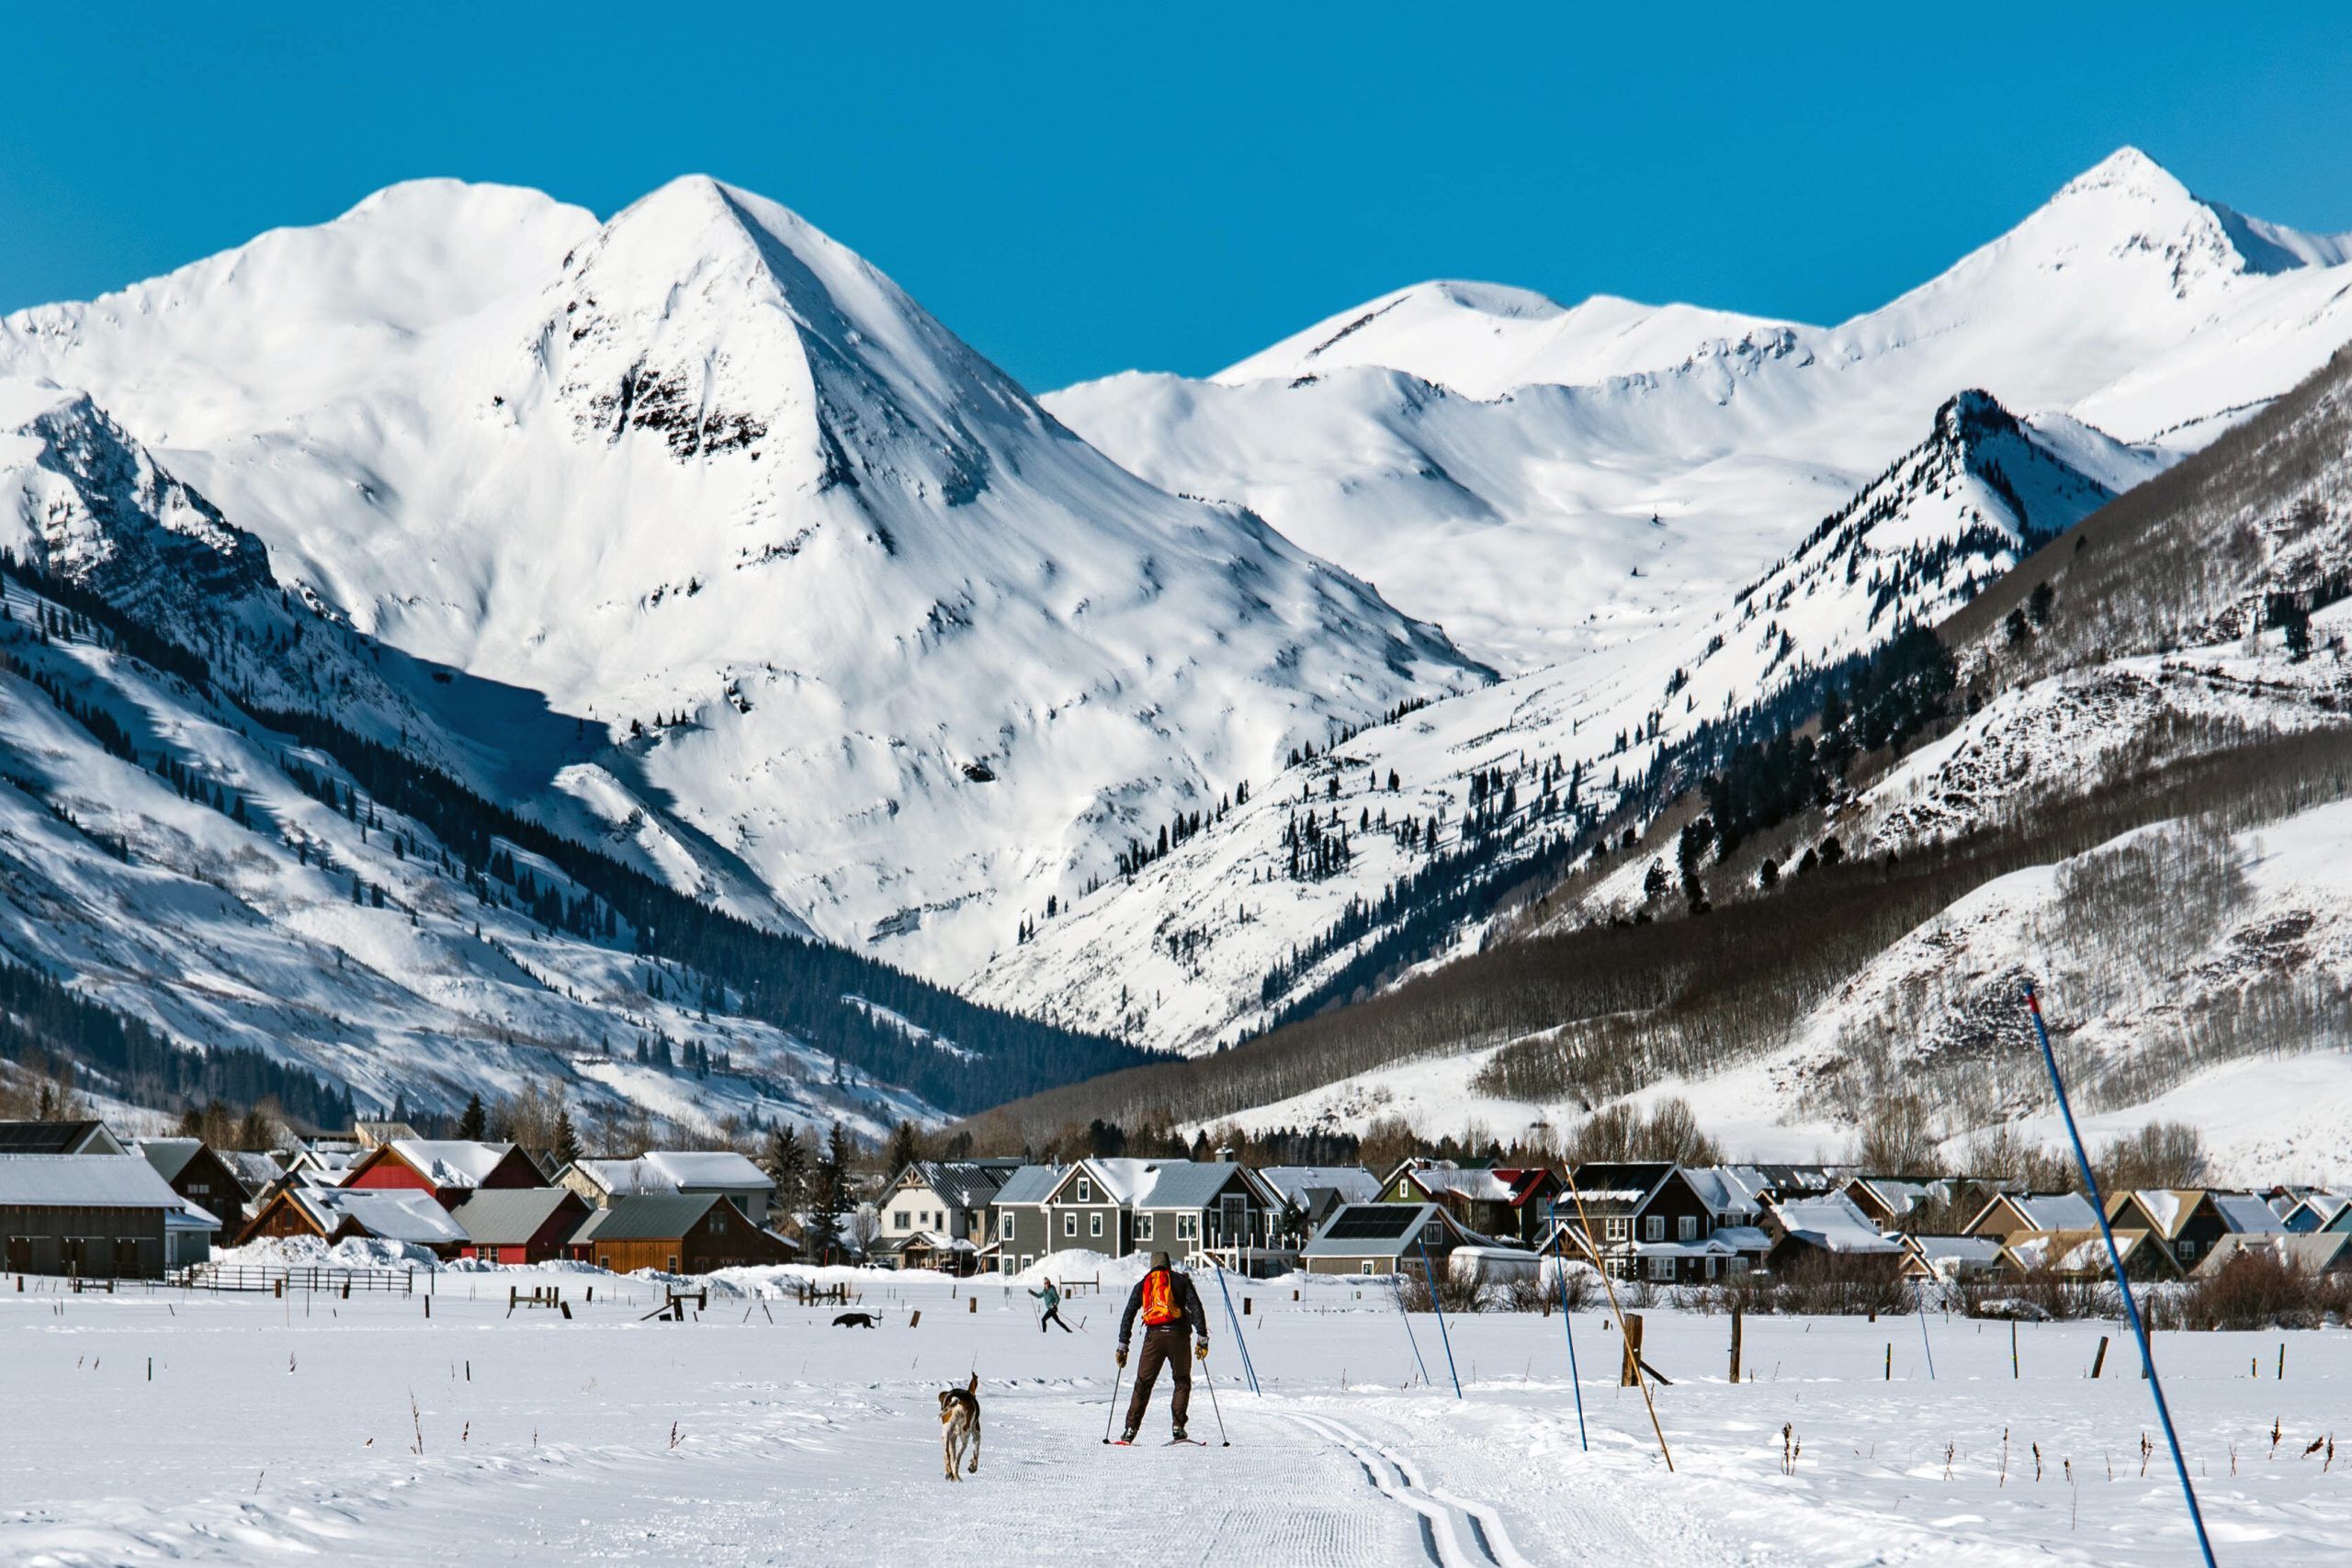 Nordic skiing in the Rocky Mountains in Crested Butte, Colorado.